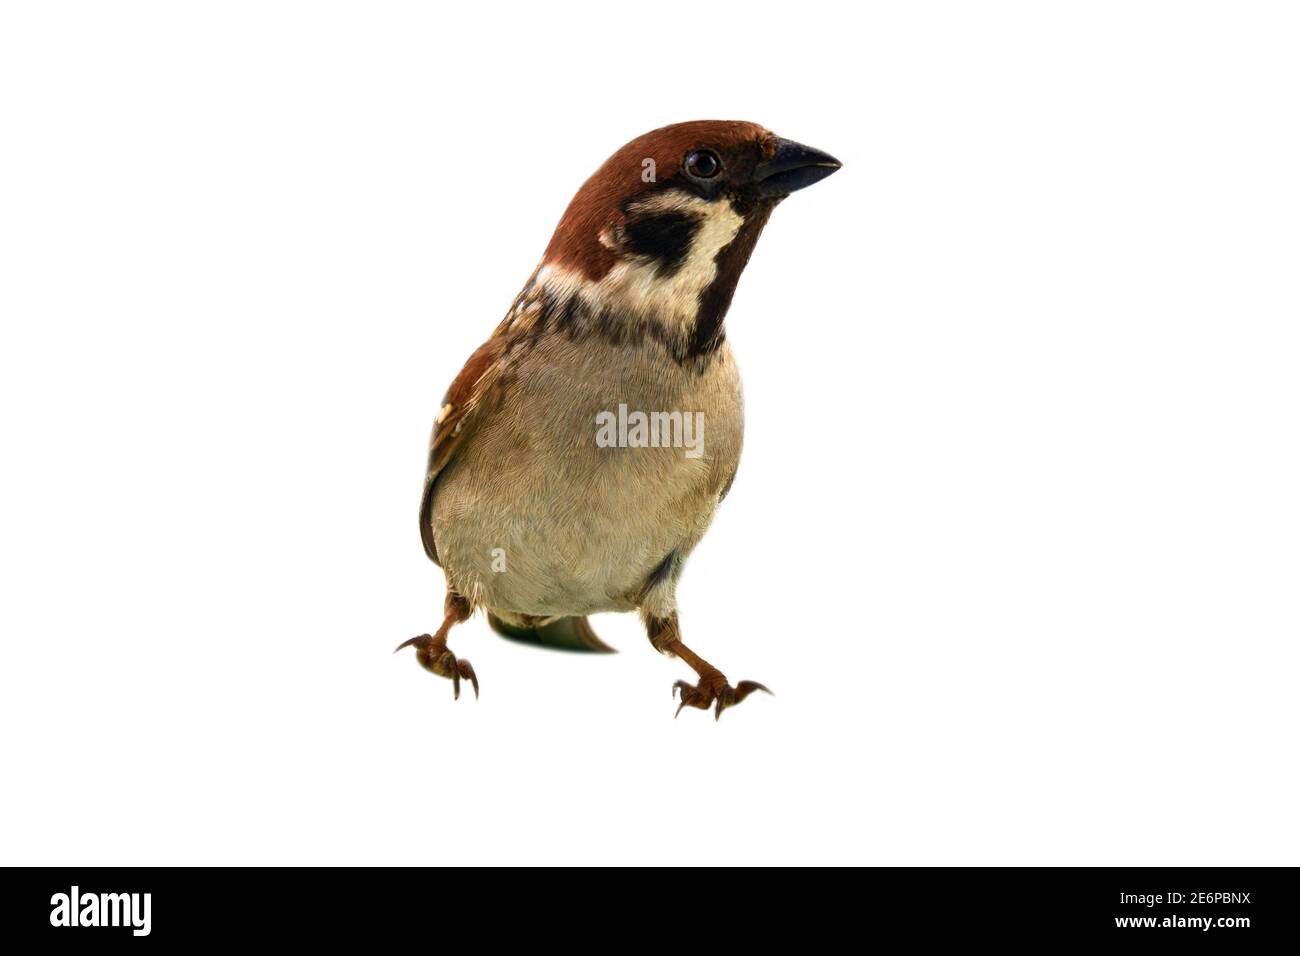 Sparrows as the most common birds in the human environment. Eurasian tree sparrow (Passer montanus) in dynamics isolated on a white background Stock Photo